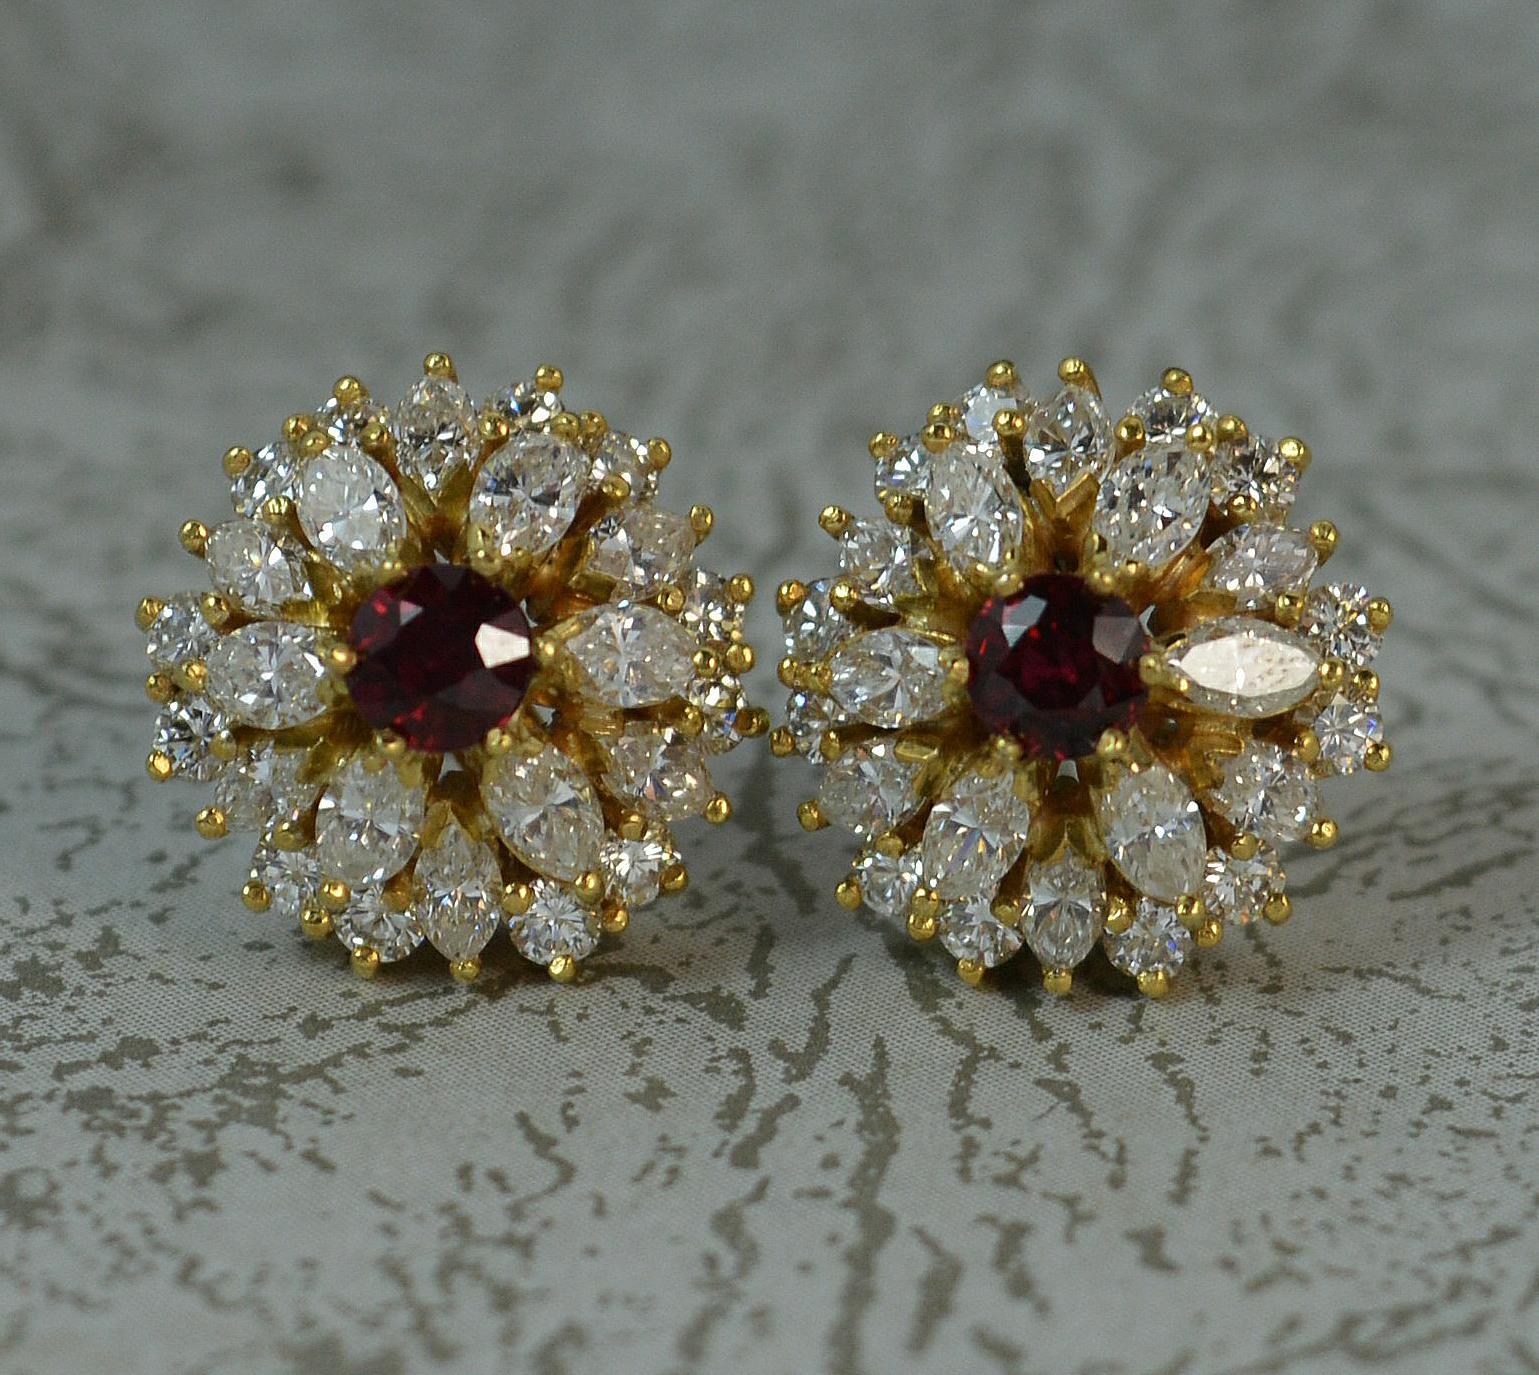 18 Carat Gold 2.8 Carat Vs Diamond and Ruby Cluster Earrings 1